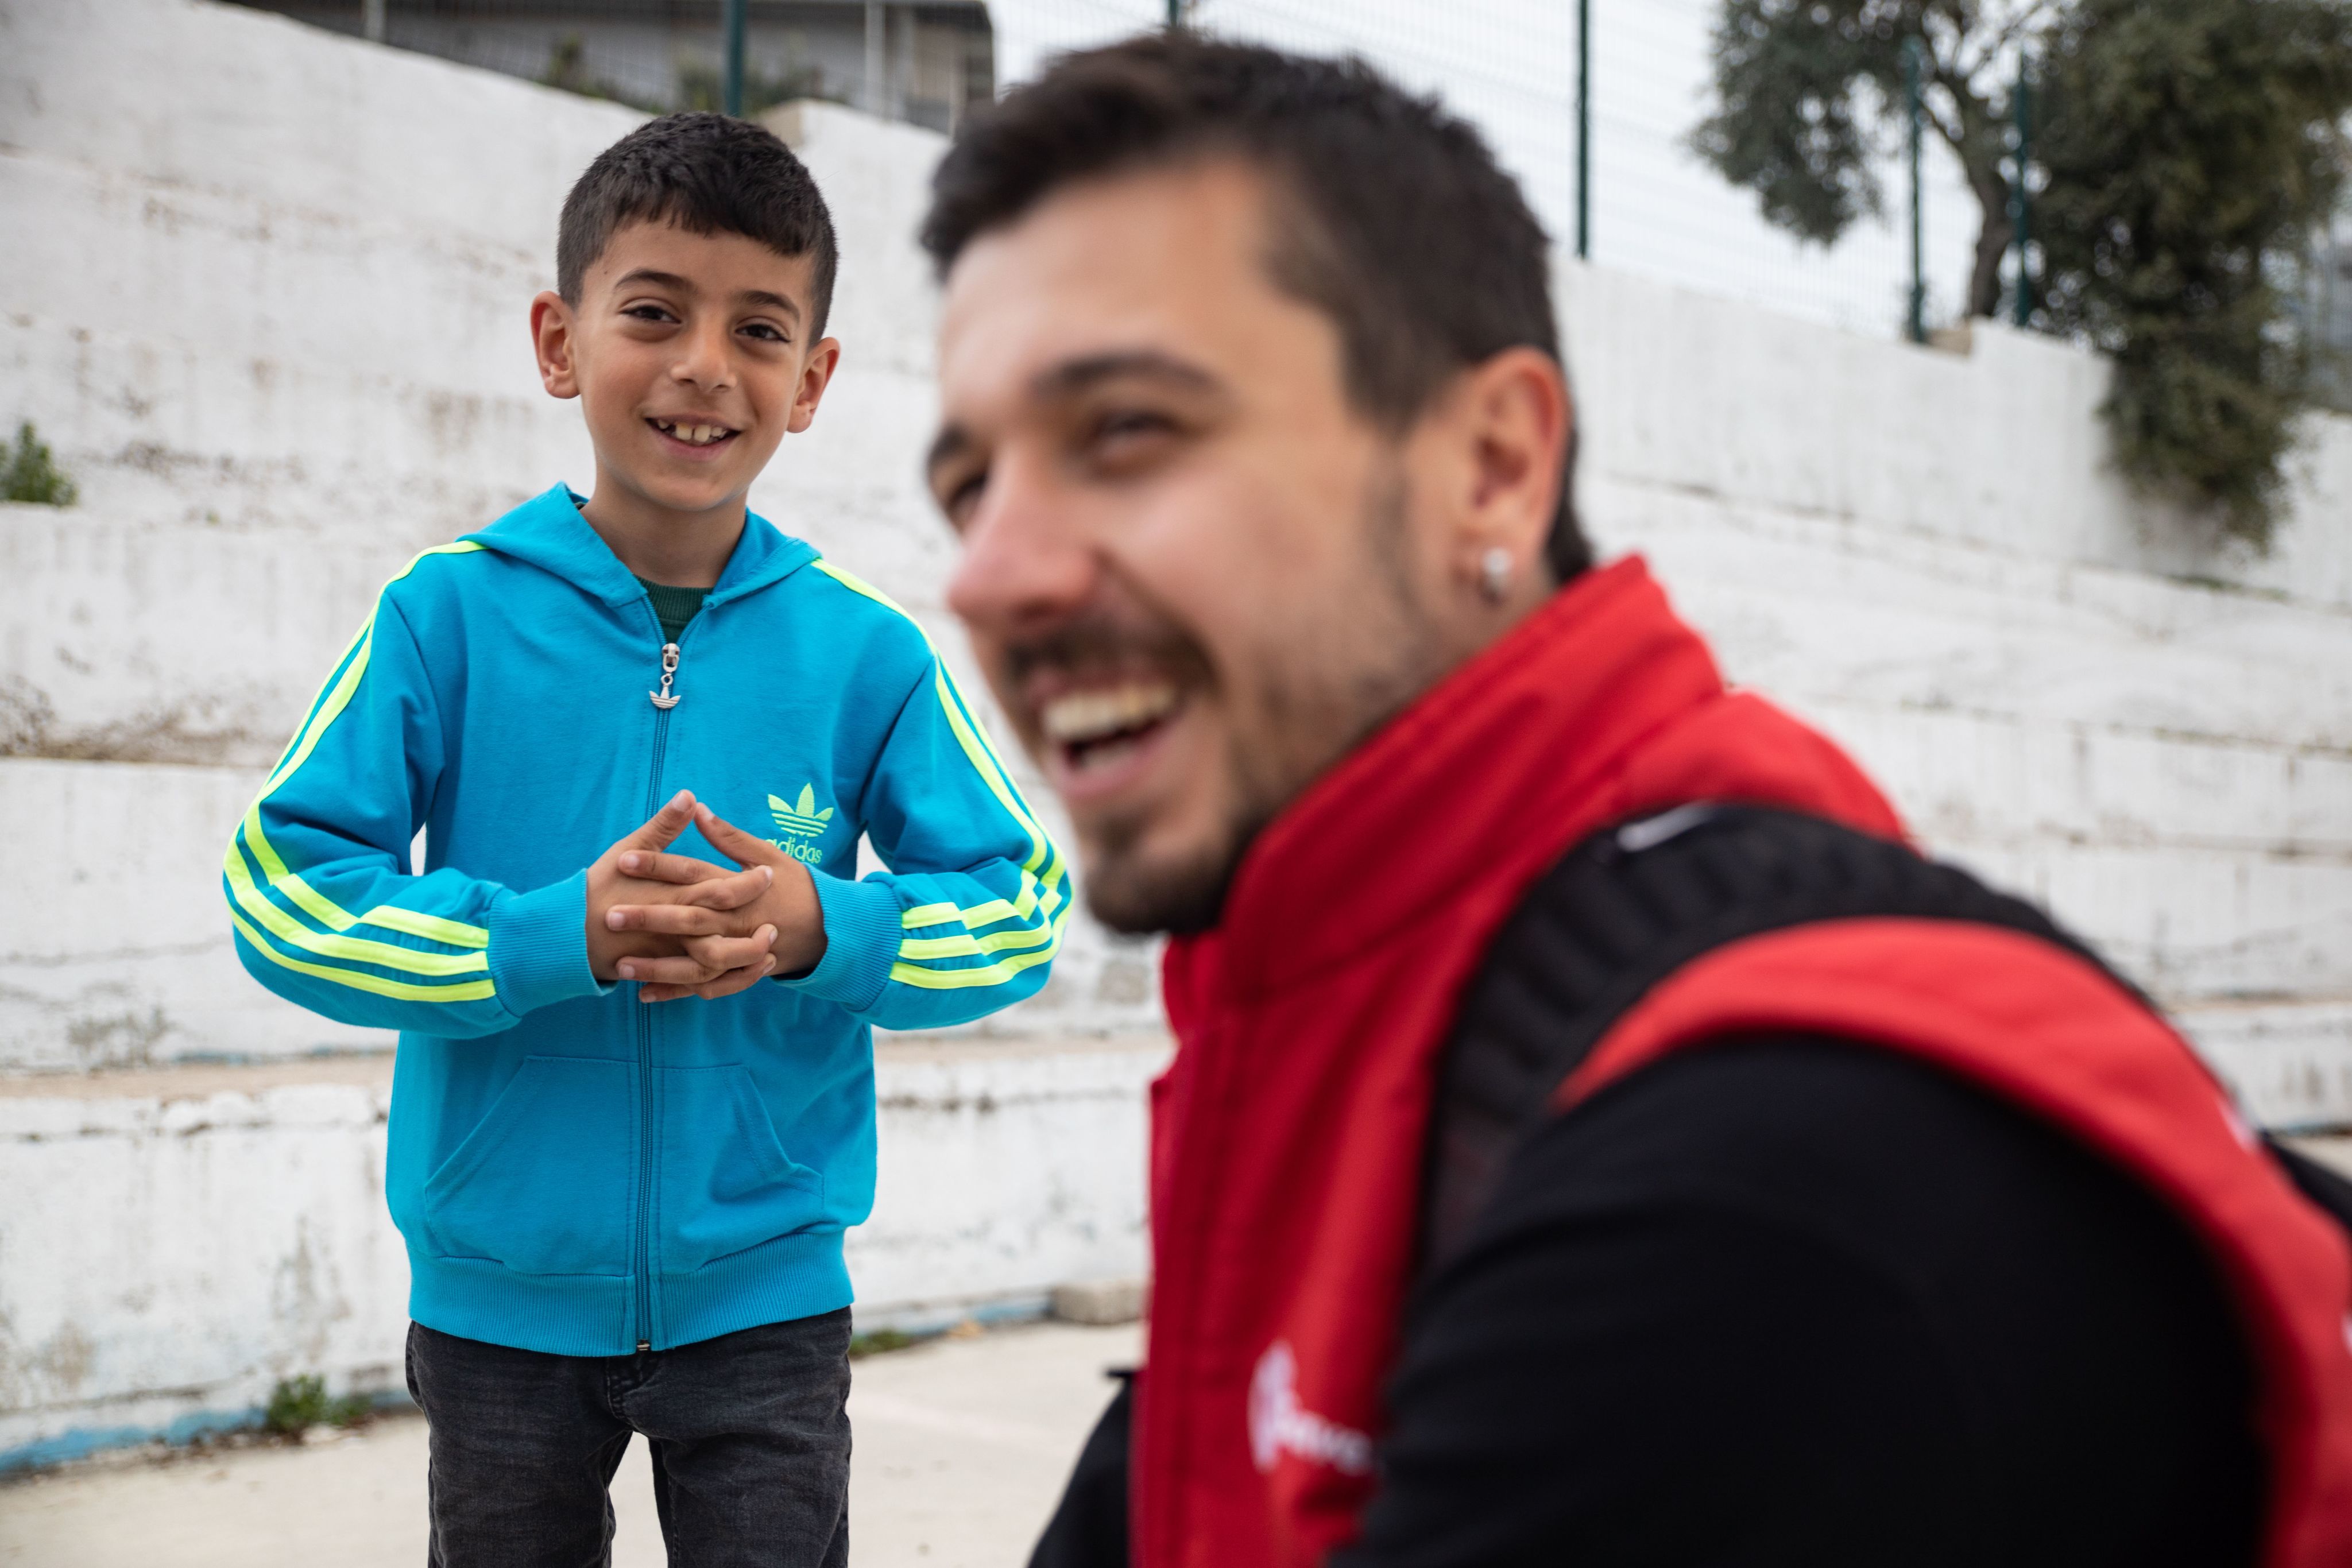 A boy smiling at the camera standing next to a Save the Children staff person.